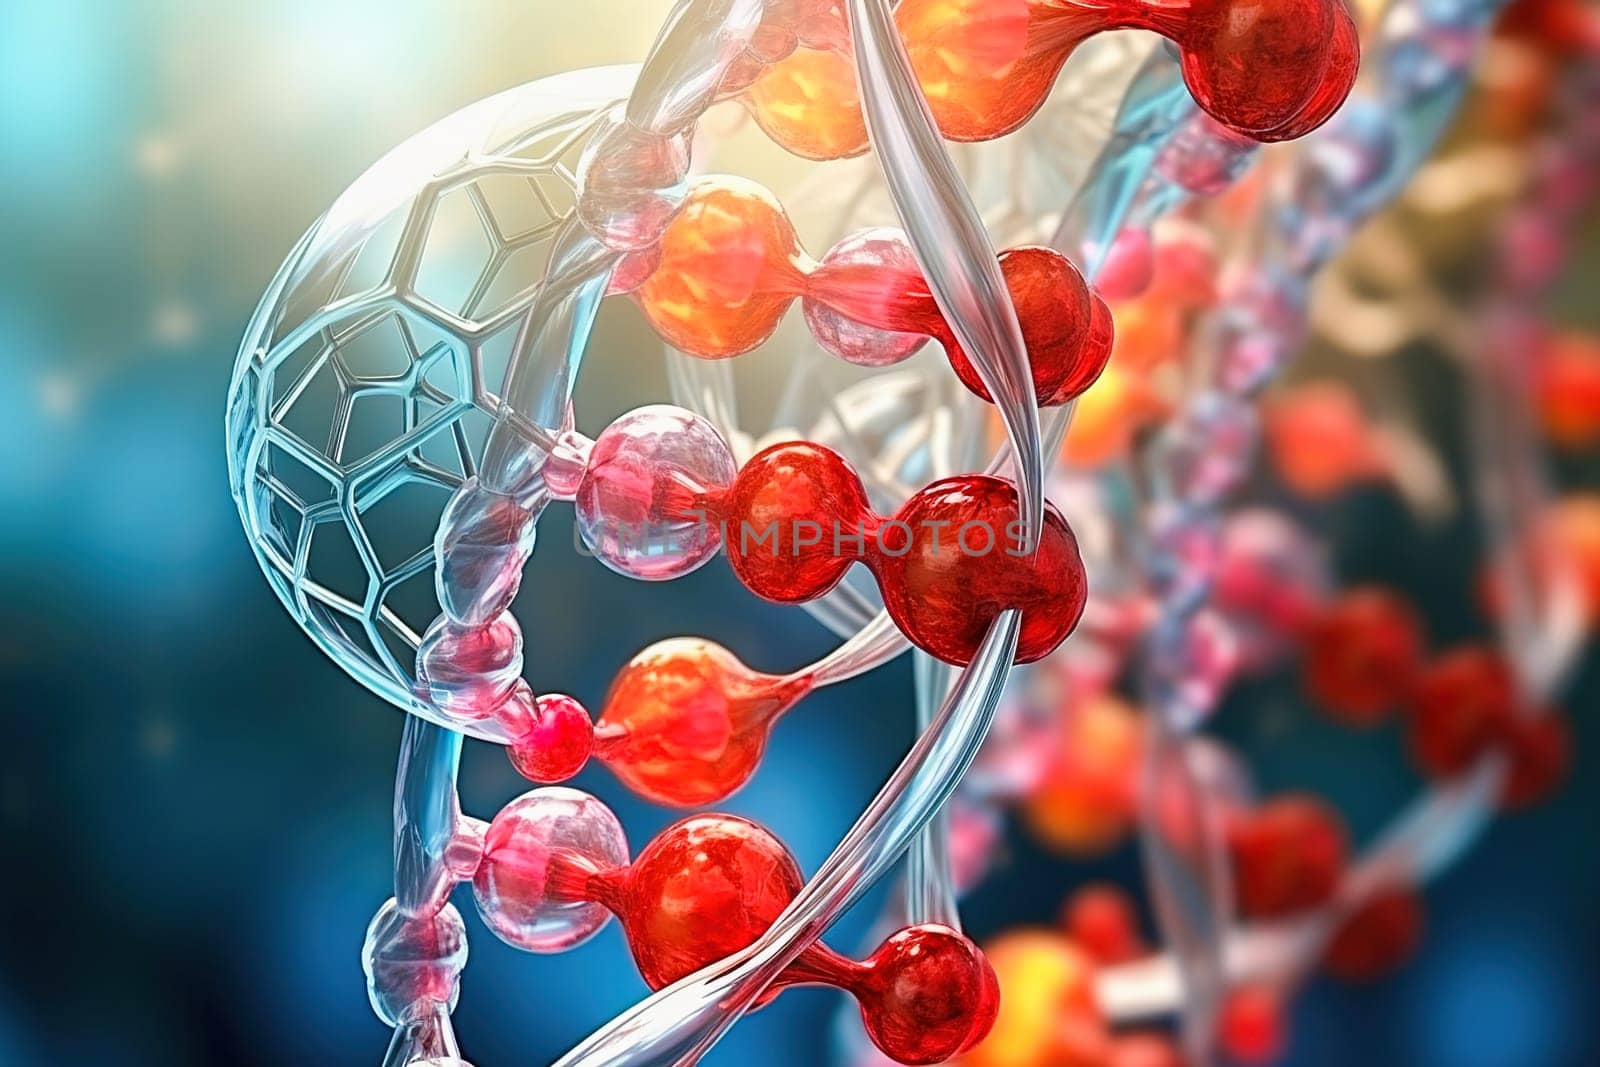 DNA helix, biotechnology and molecular engineering, scientific medicine and innovation concept. DNA gene editing using modern technologies